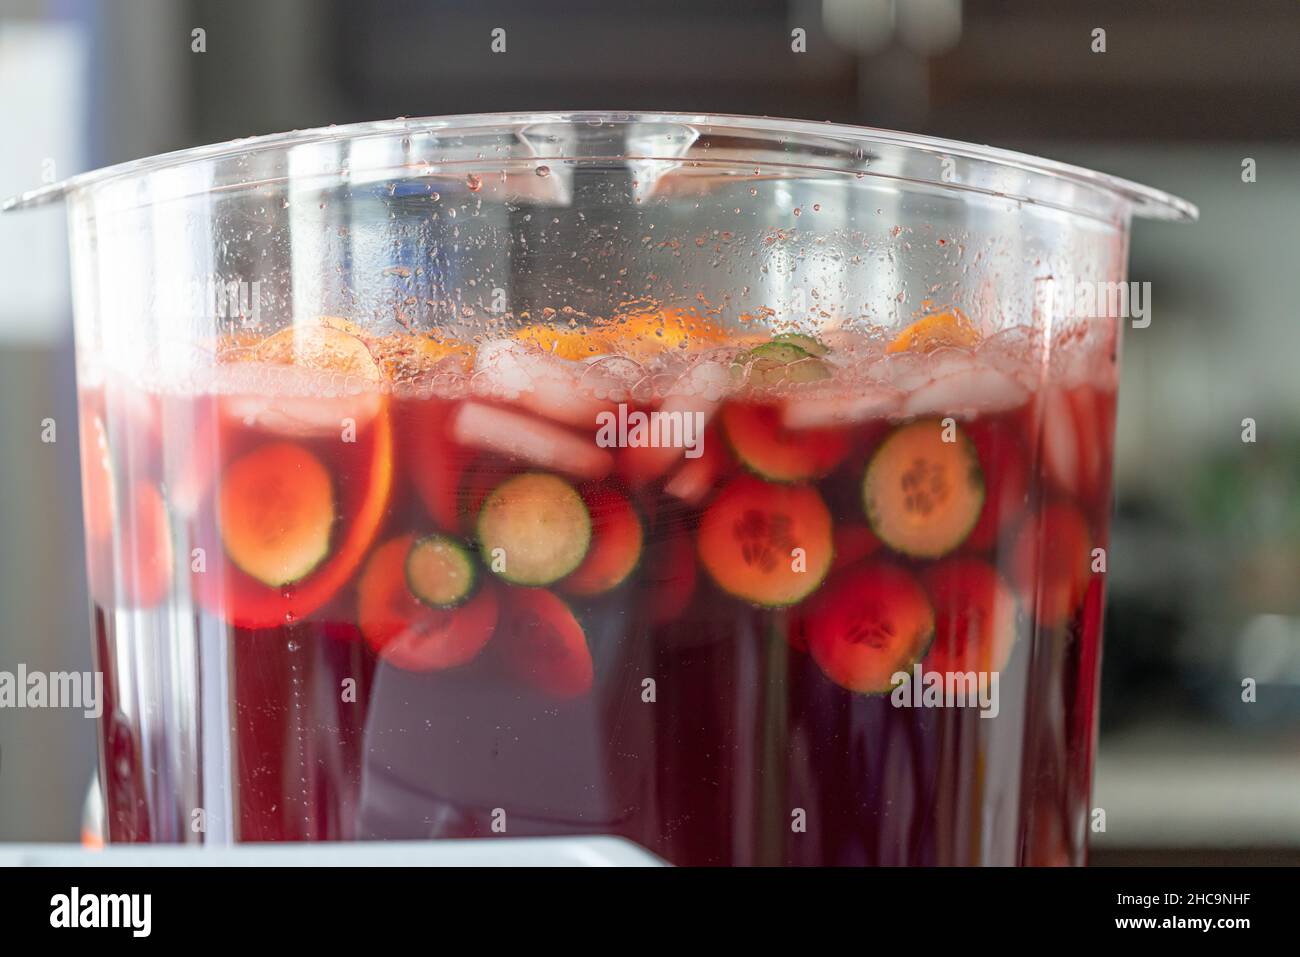 https://c8.alamy.com/comp/2HC9NHF/fruit-punch-in-a-drink-dispenser-at-a-party-2HC9NHF.jpg